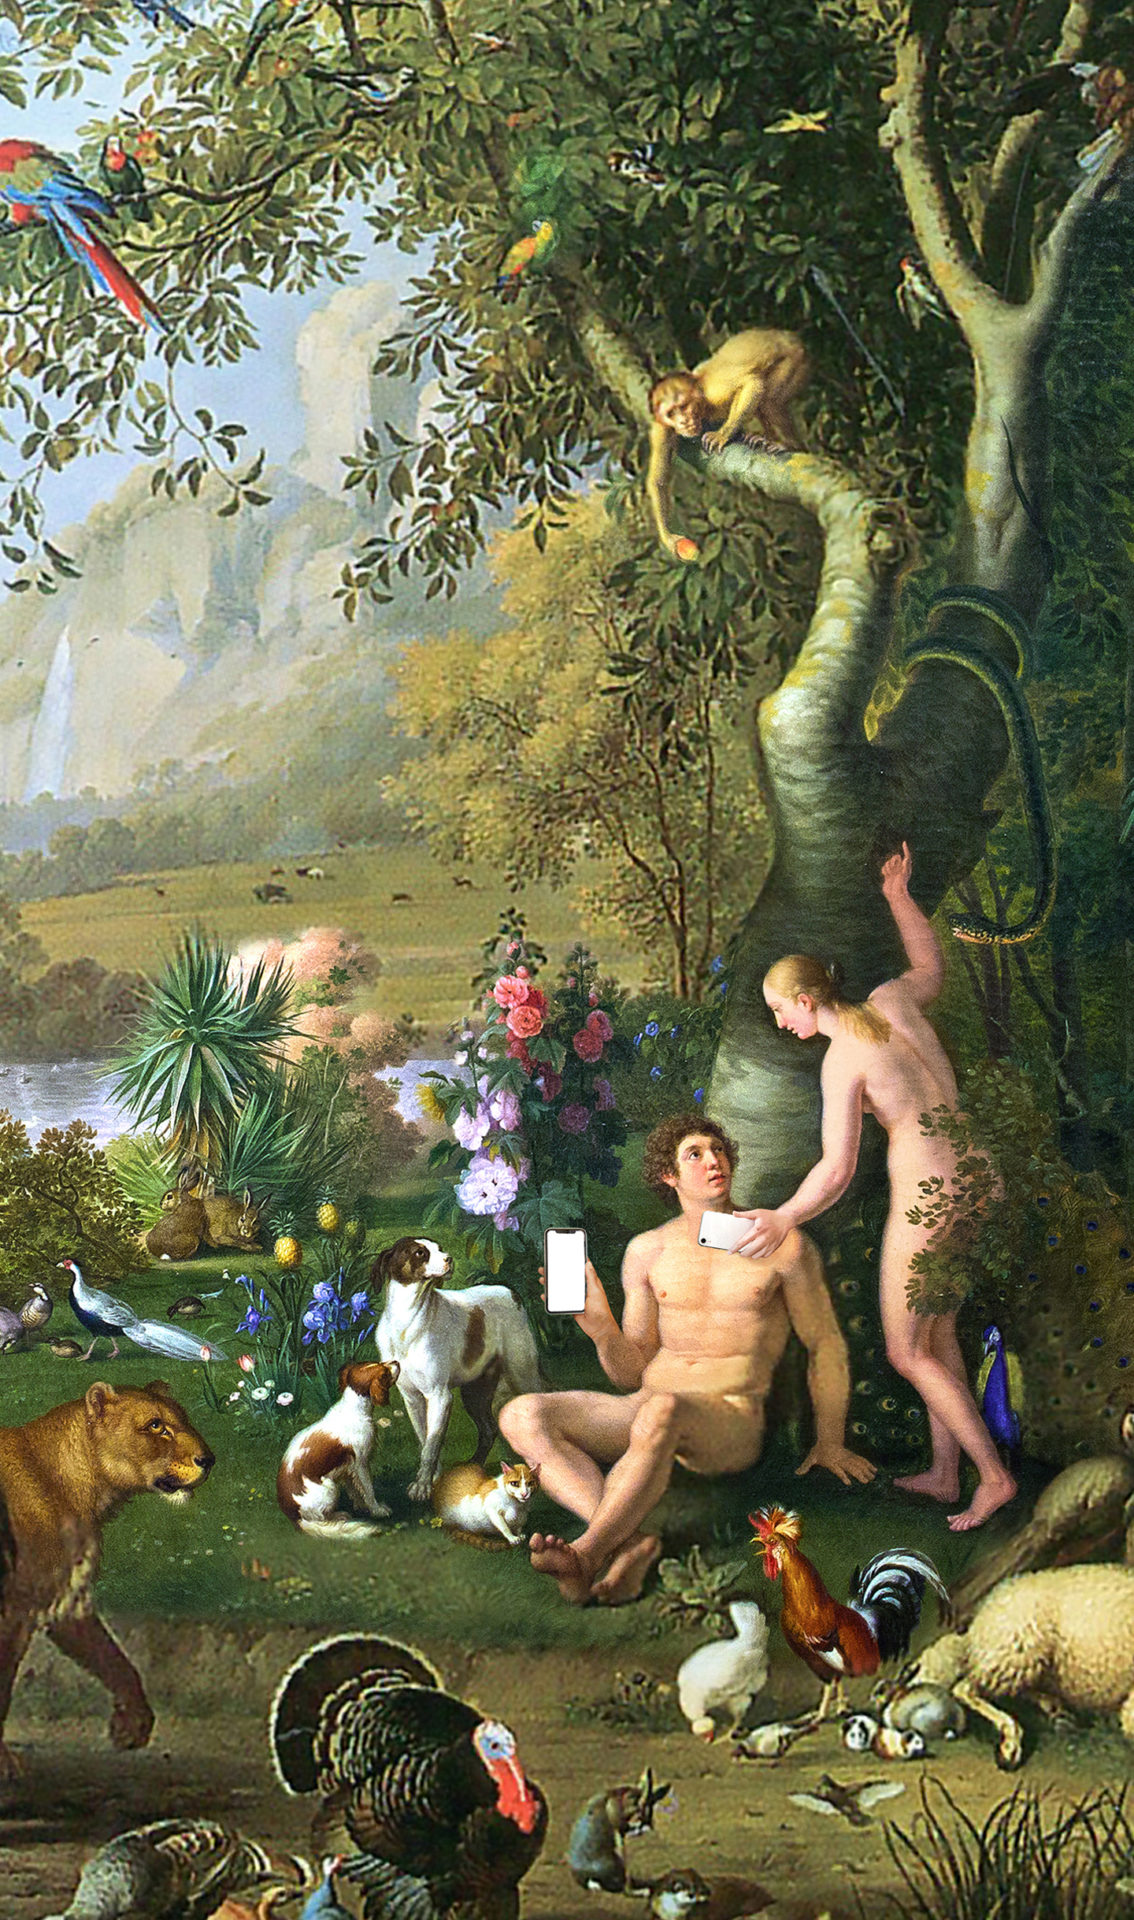 adam and eve with mobile phones